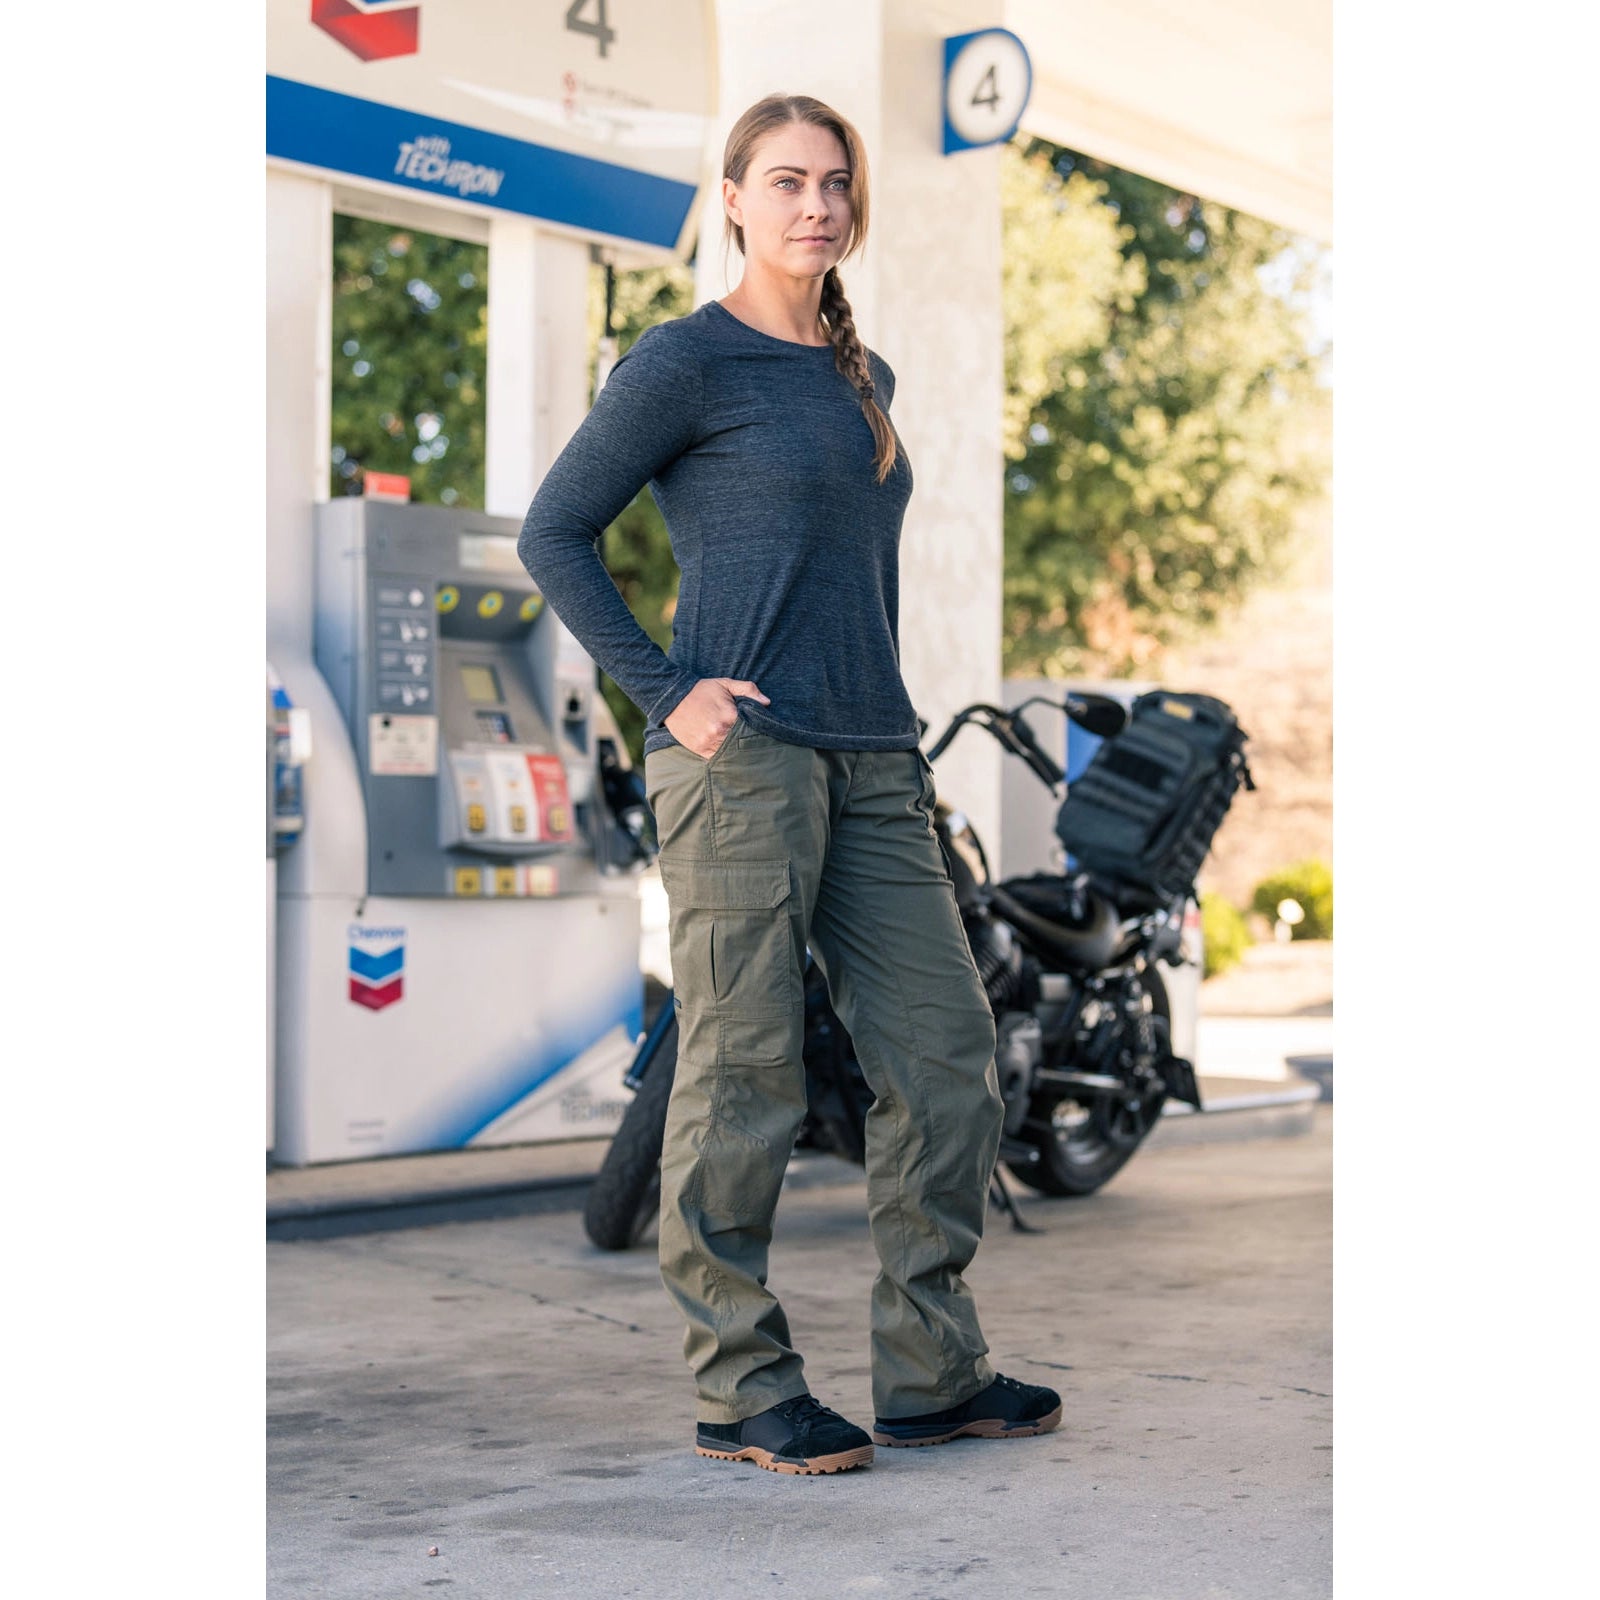 ABR™ Pro Pant: Durable, Functional Tactical Pants for Demanding Missions